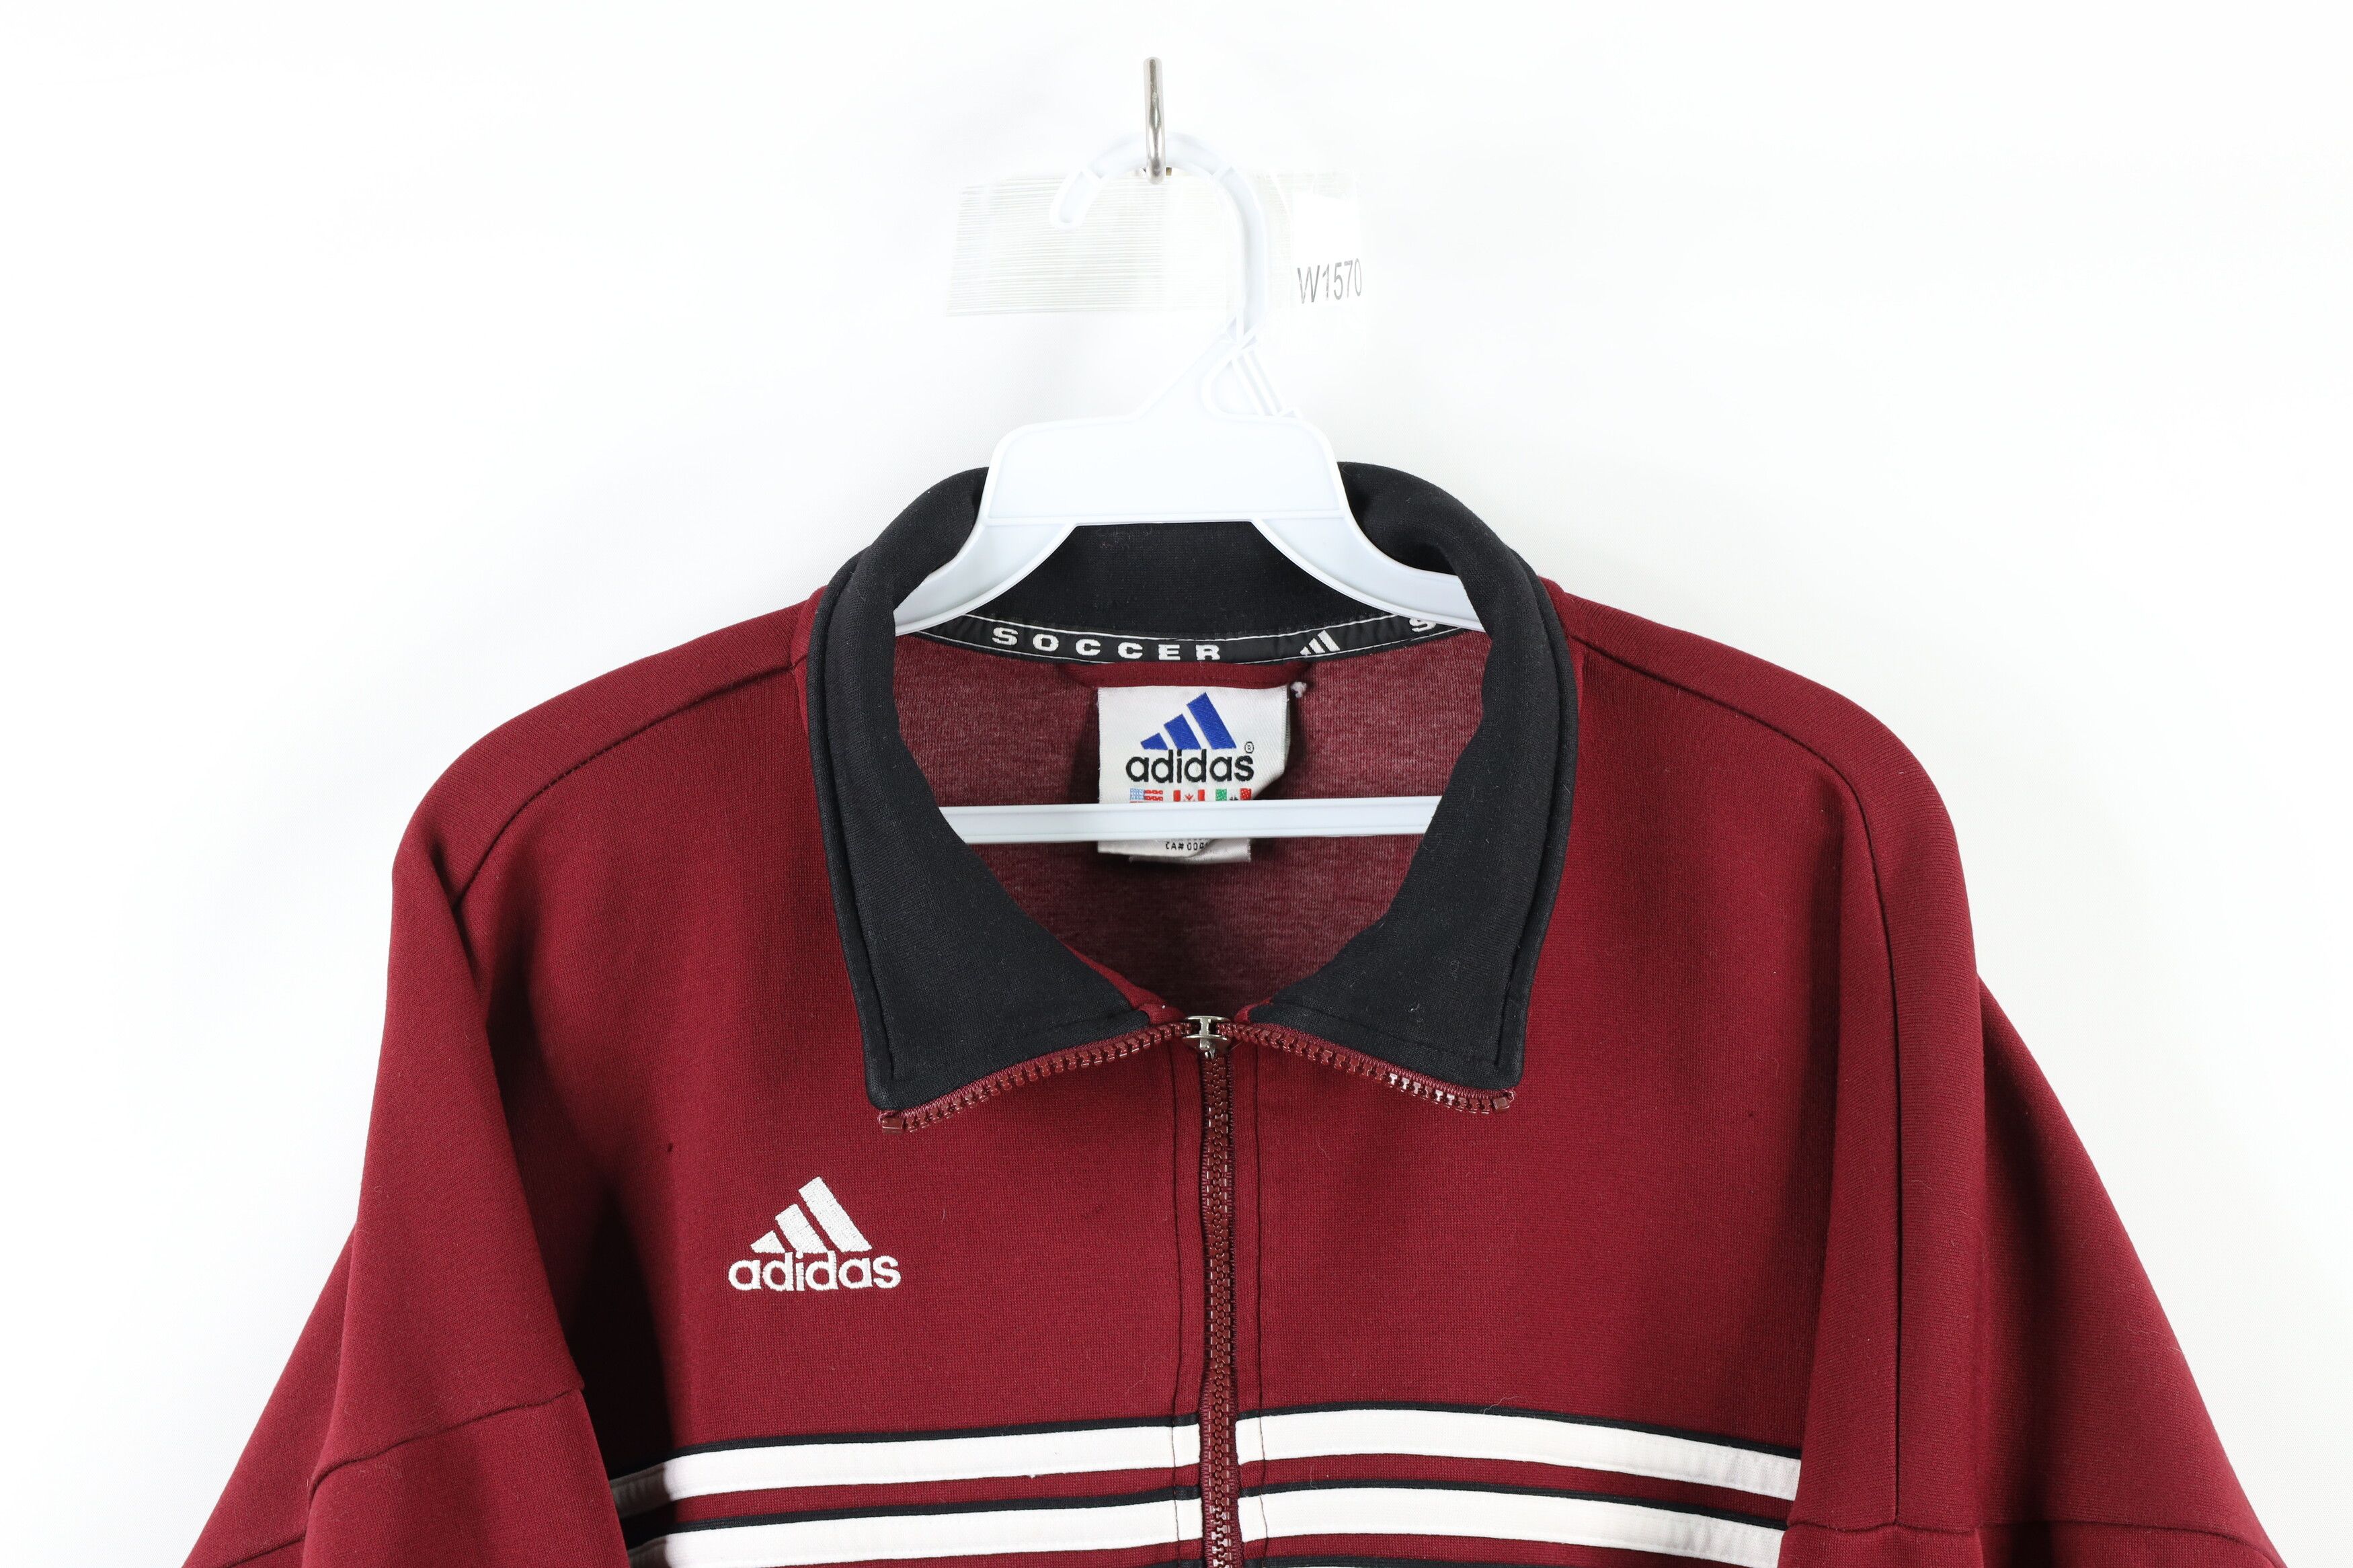 Adidas Vintage Adidas Spell Out Striped Soccer Warm Up Jacket Size US L / EU 52-54 / 3 - 2 Preview